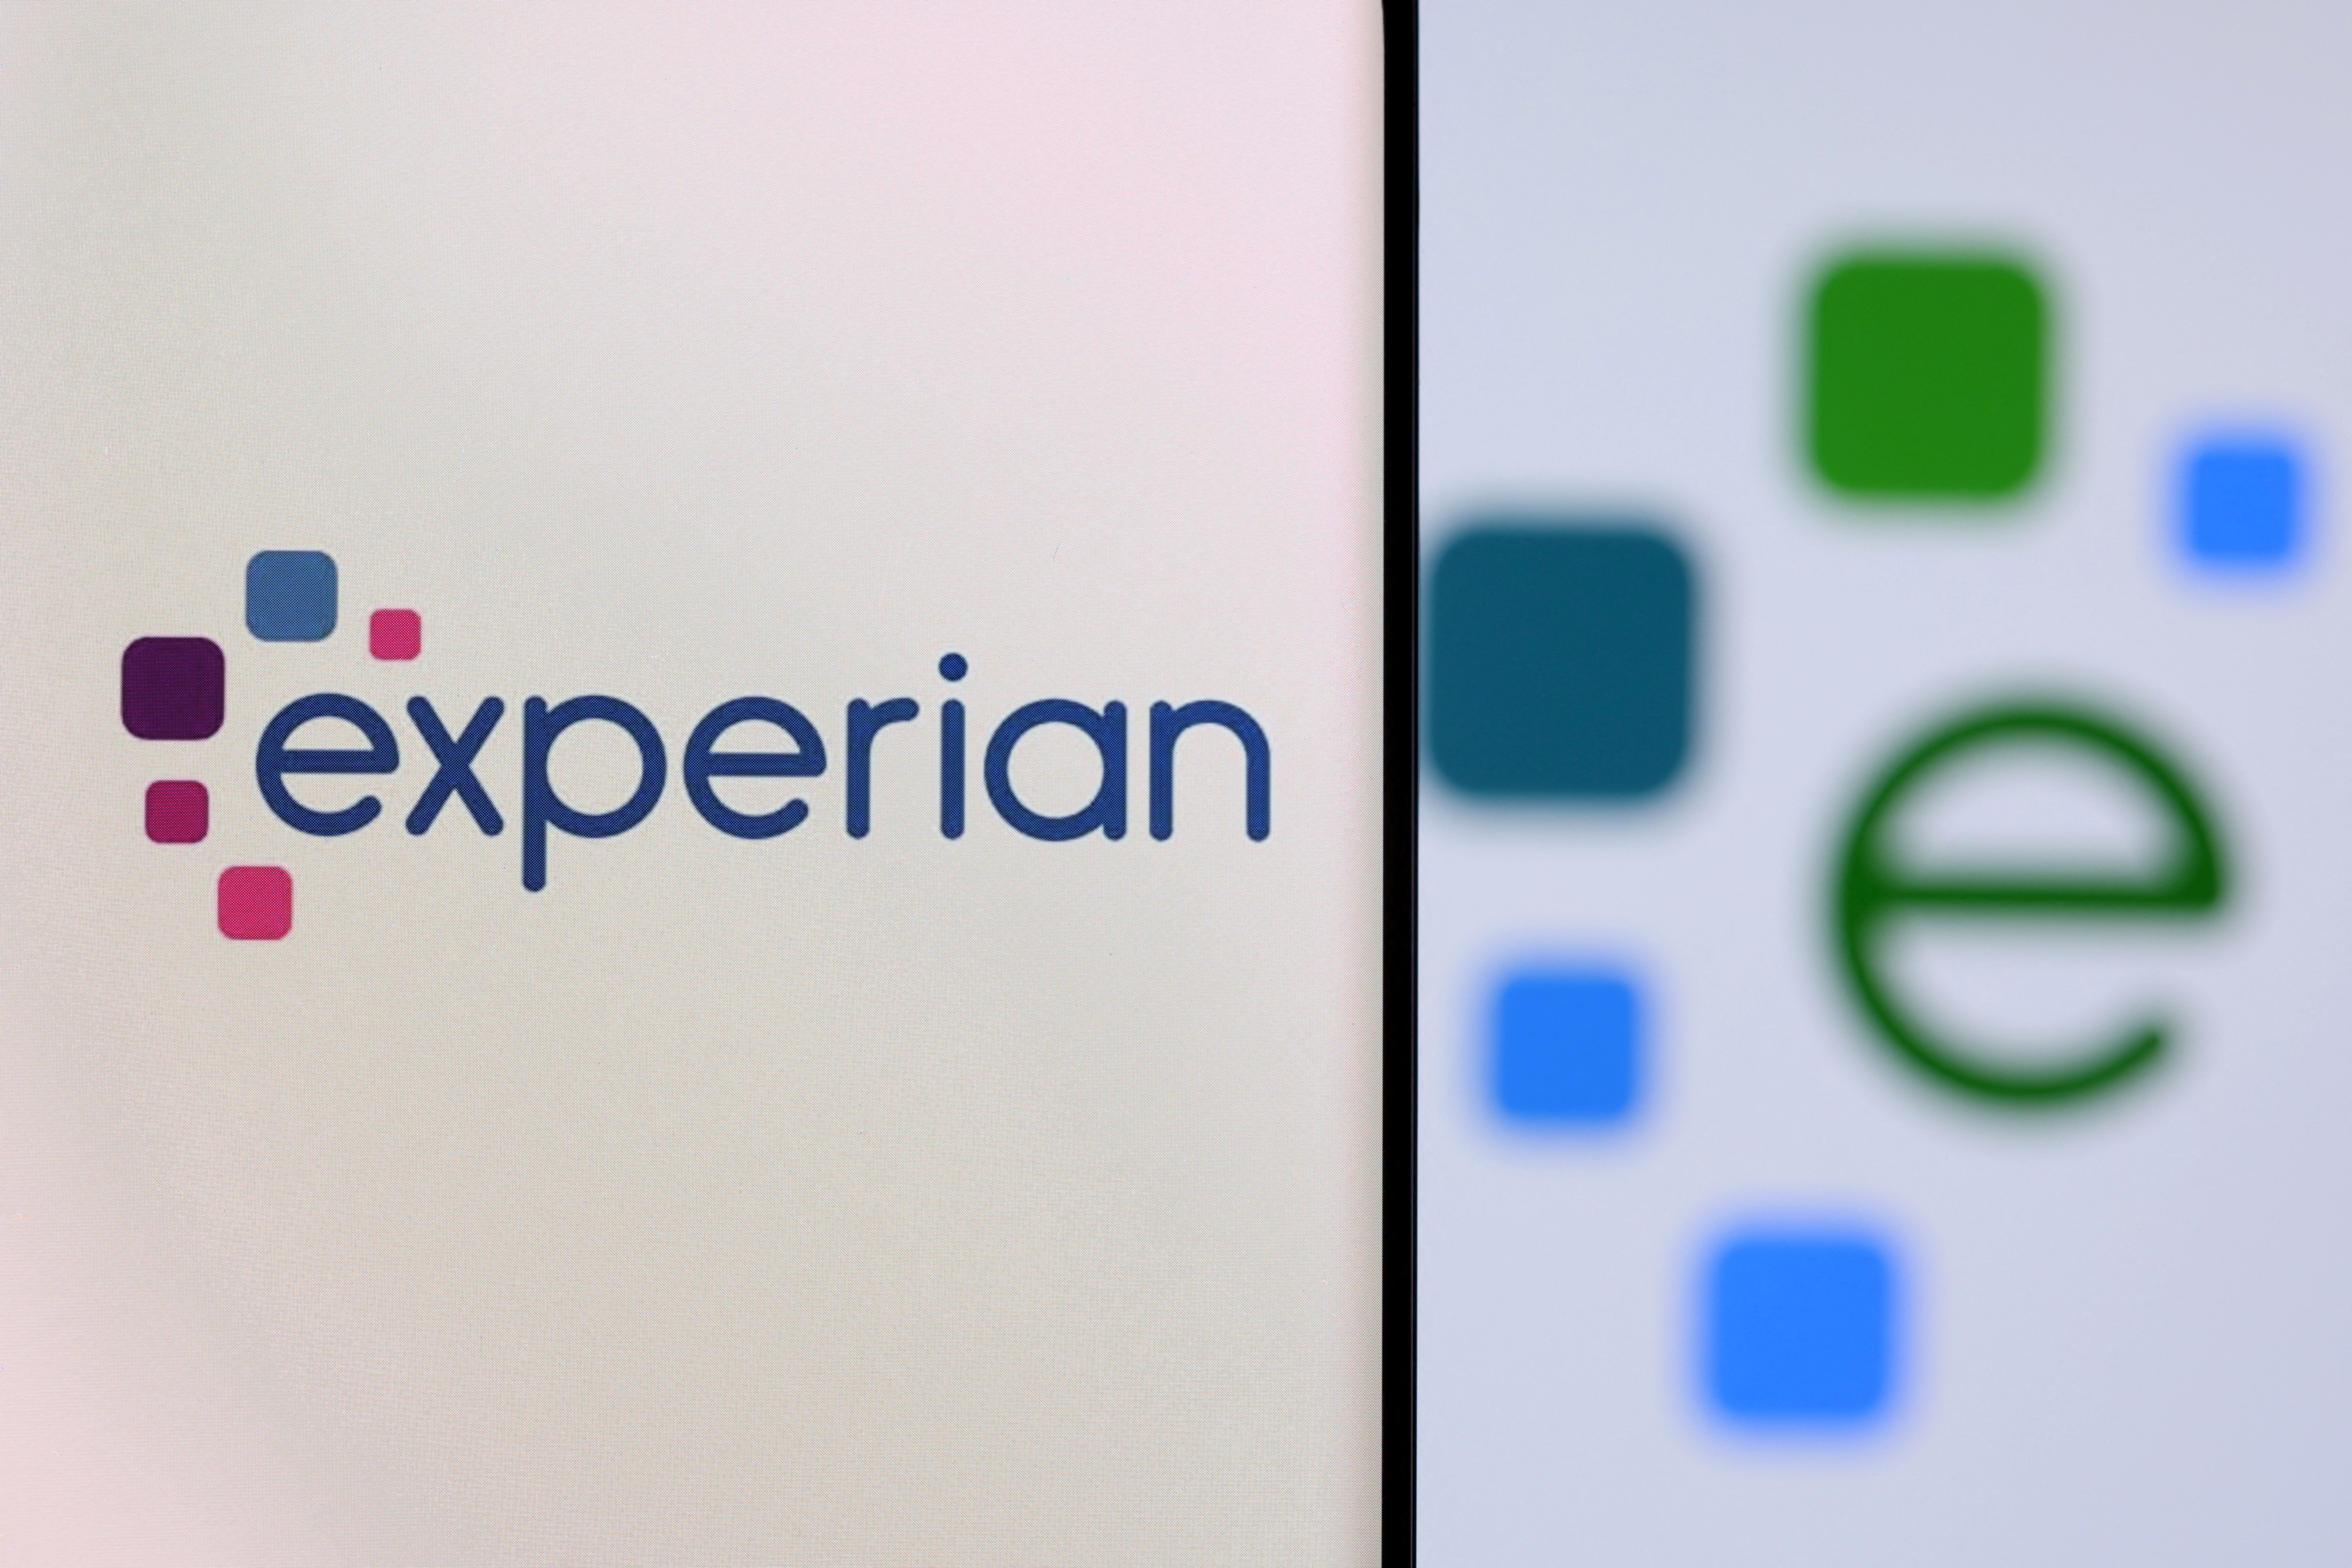 Illustration shows a smartphone with displayed Experian logo